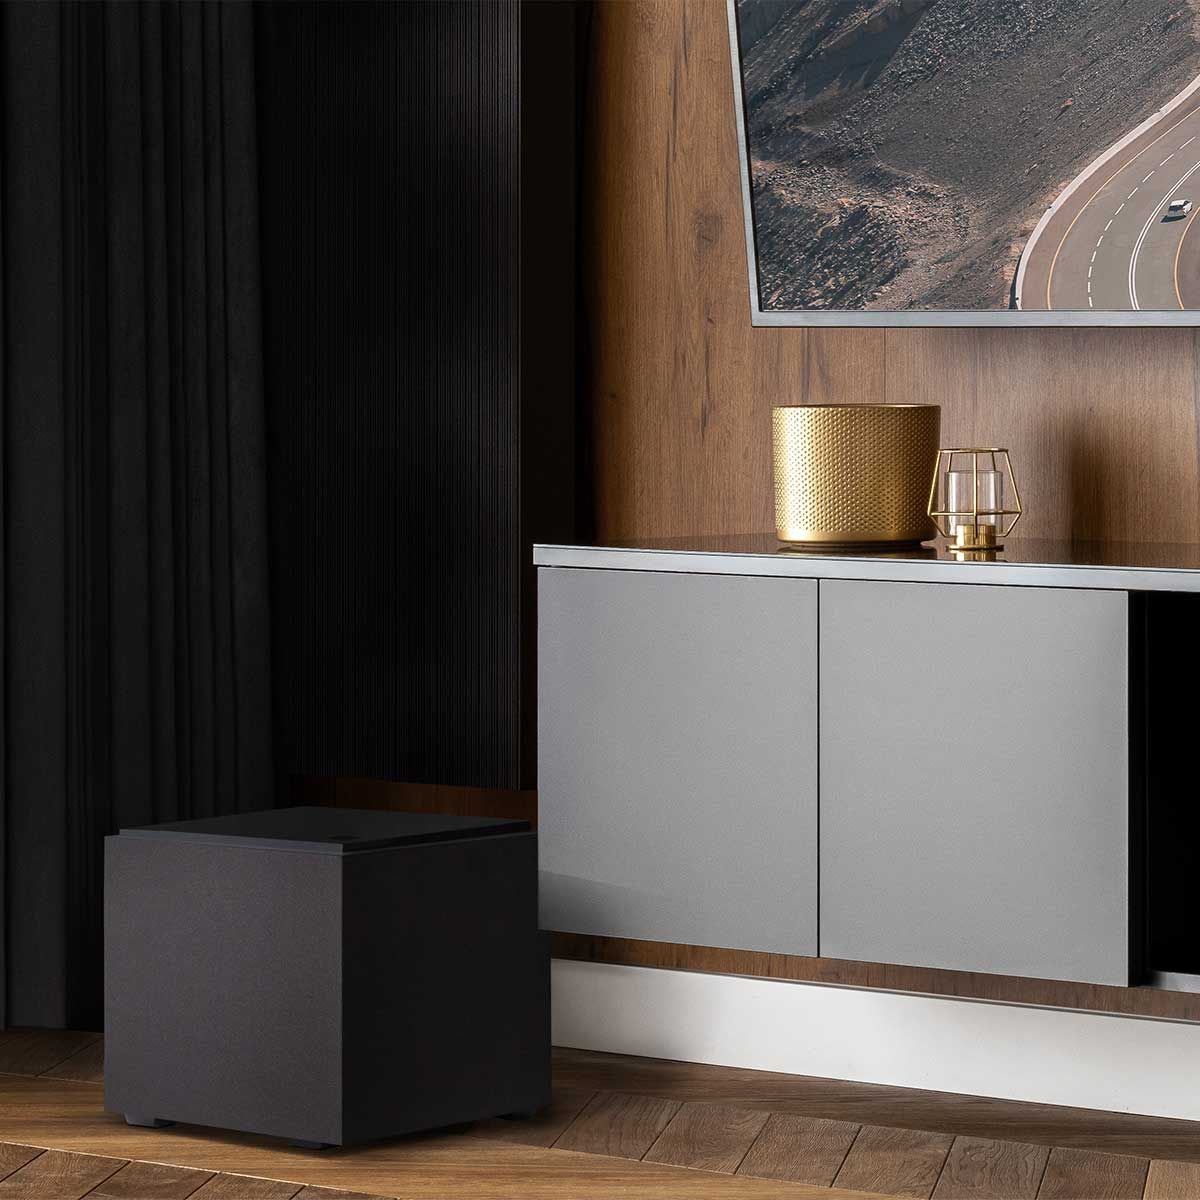 Definitive Technology Descend 8" Subwoofer, Midnight Black, set up near a light grey sideboard in a living room space